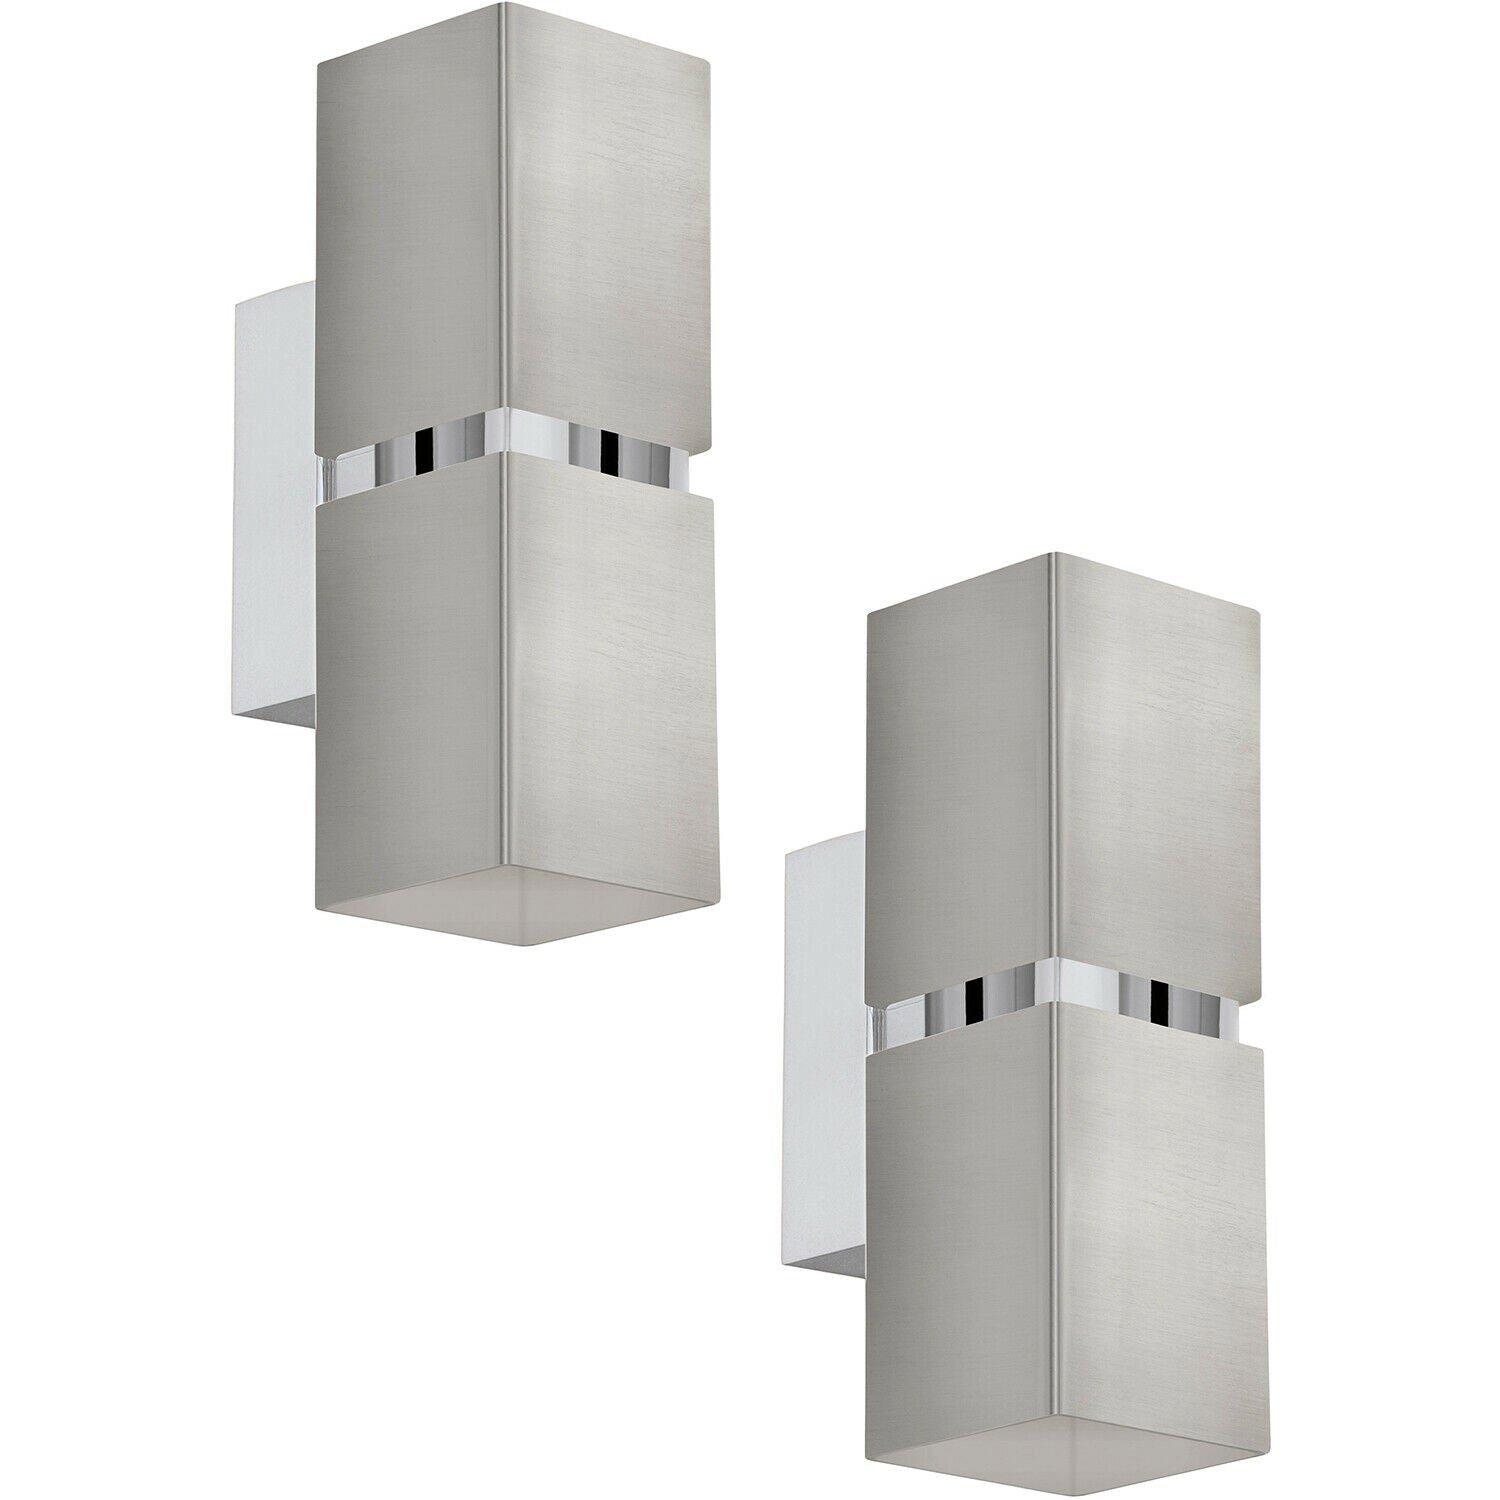 2 PACK Wall Light Colour Satin Nickel Chrome Square Shades GU10 2x3.3W Included